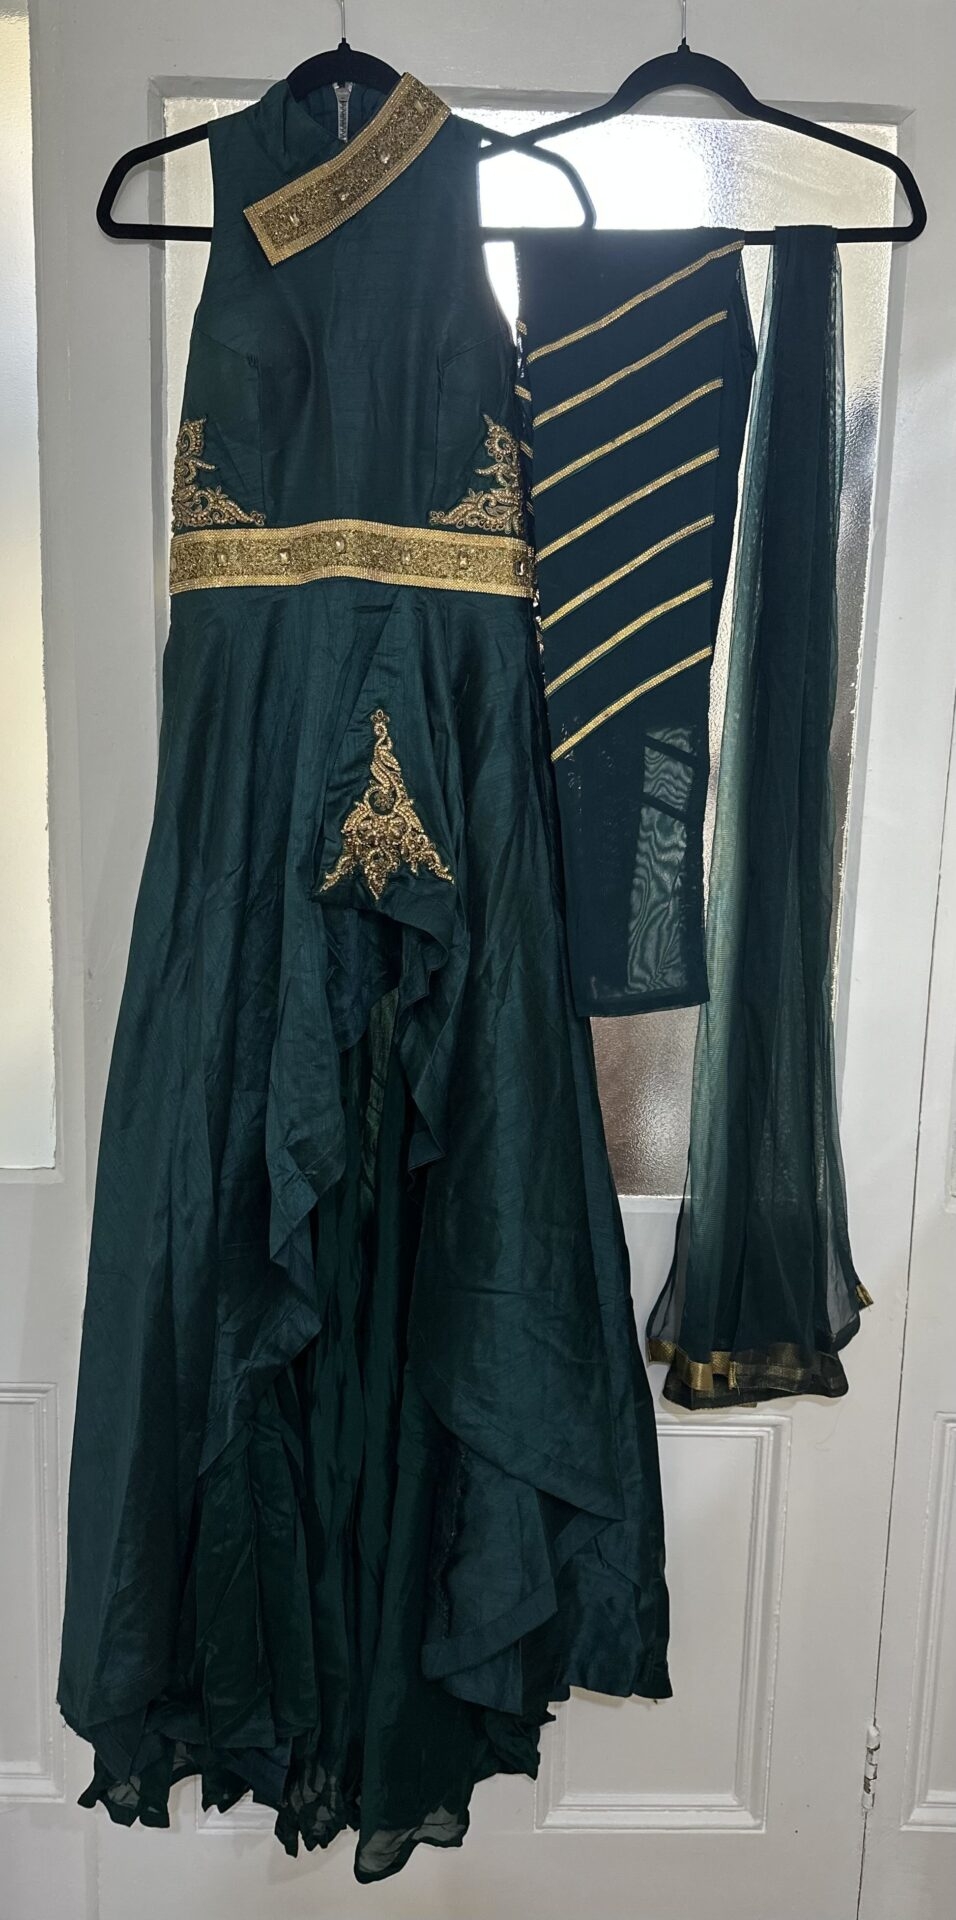 Elegant green and gold embroidery dress